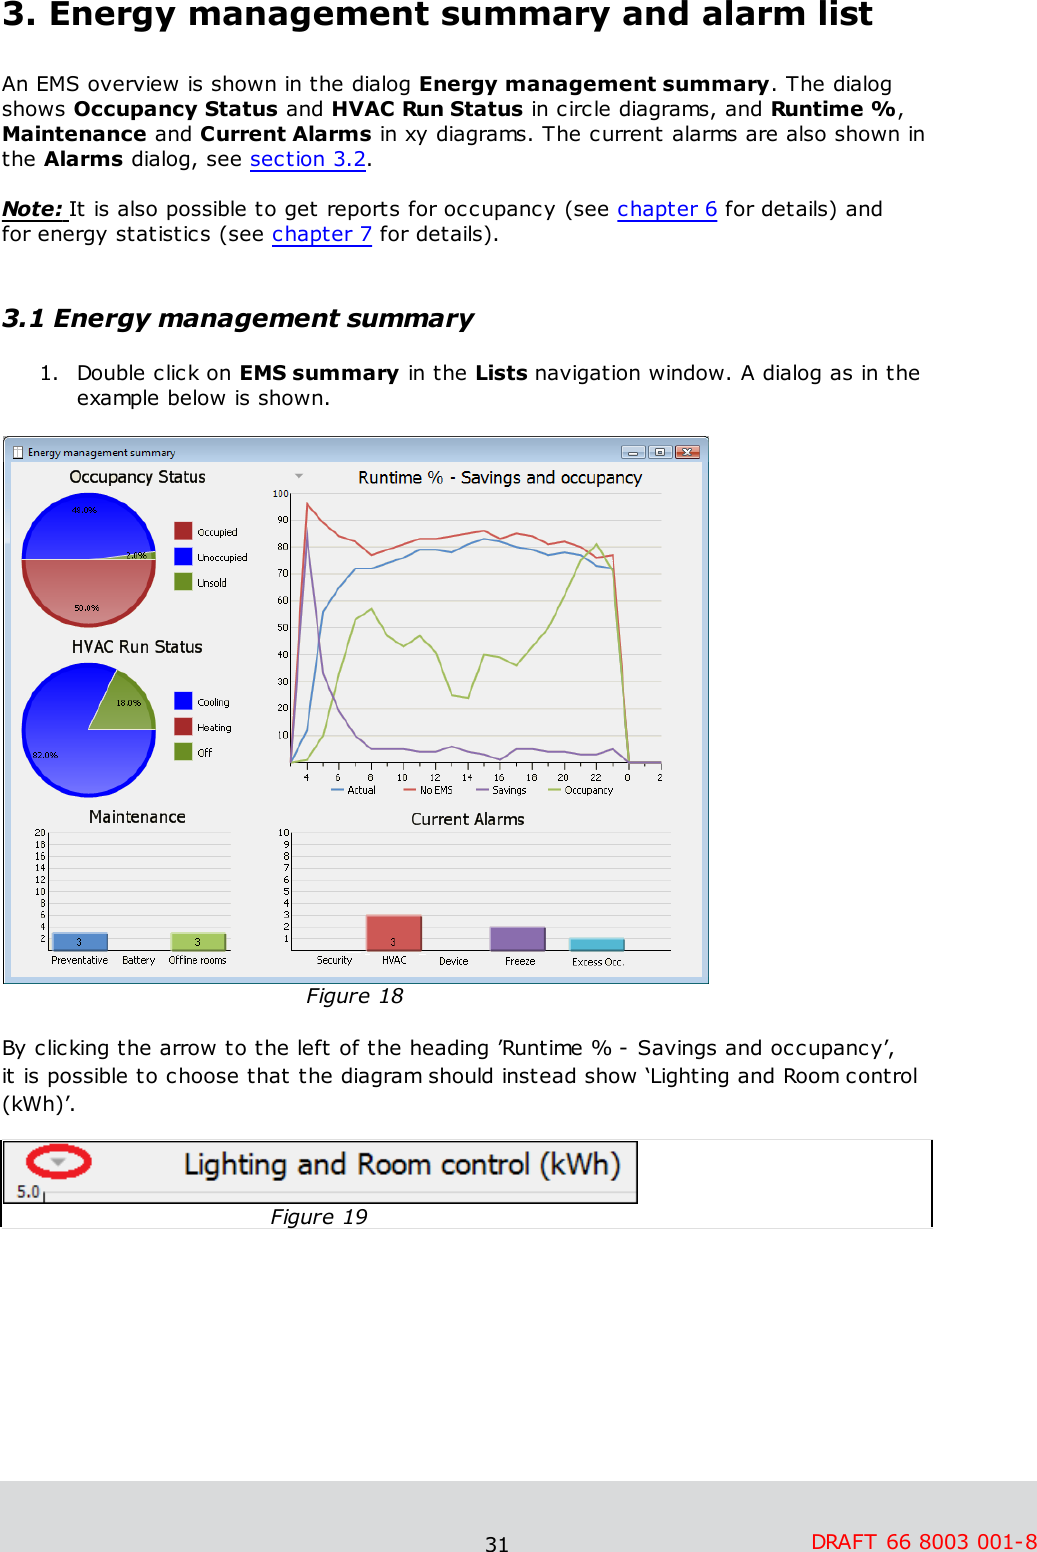 31 DRAFT 66 8003 001-83. Energy management summary and alarm listAn EMS overview is shown in the dialog Energy management summary. The dialogshows Occupancy Status and HVAC Run Status in circle diagrams, and Runtime %,Maintenance and Current Alarms in xy diagrams. The current alarms are also shown inthe Alarms dialog, see section 3.2.  Note: It is also possible to get reports for occupancy (see chapter 6 for details) and for energy statistics (see chapter 7 for details). 3.1 Energy management summary1. Double click on EMS summary in the Lists navigation window. A dialog as in theexample below is shown.Figure 18By clicking the arrow to the left of the heading ’Runtime % - Savings and occupancy’, it is possible to choose that the diagram should instead show ‘Lighting and Room control(kWh)’. Figure 19